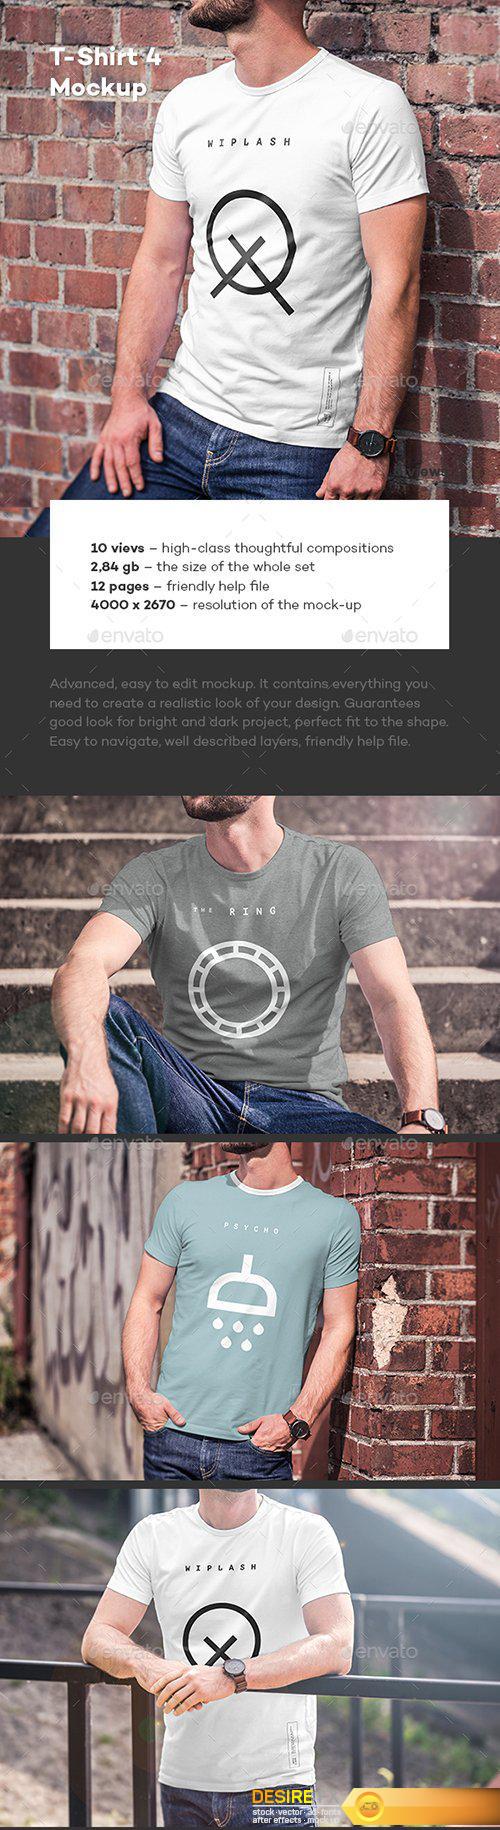 Graphicriver - T-Shirt Mock-up 4 22617760